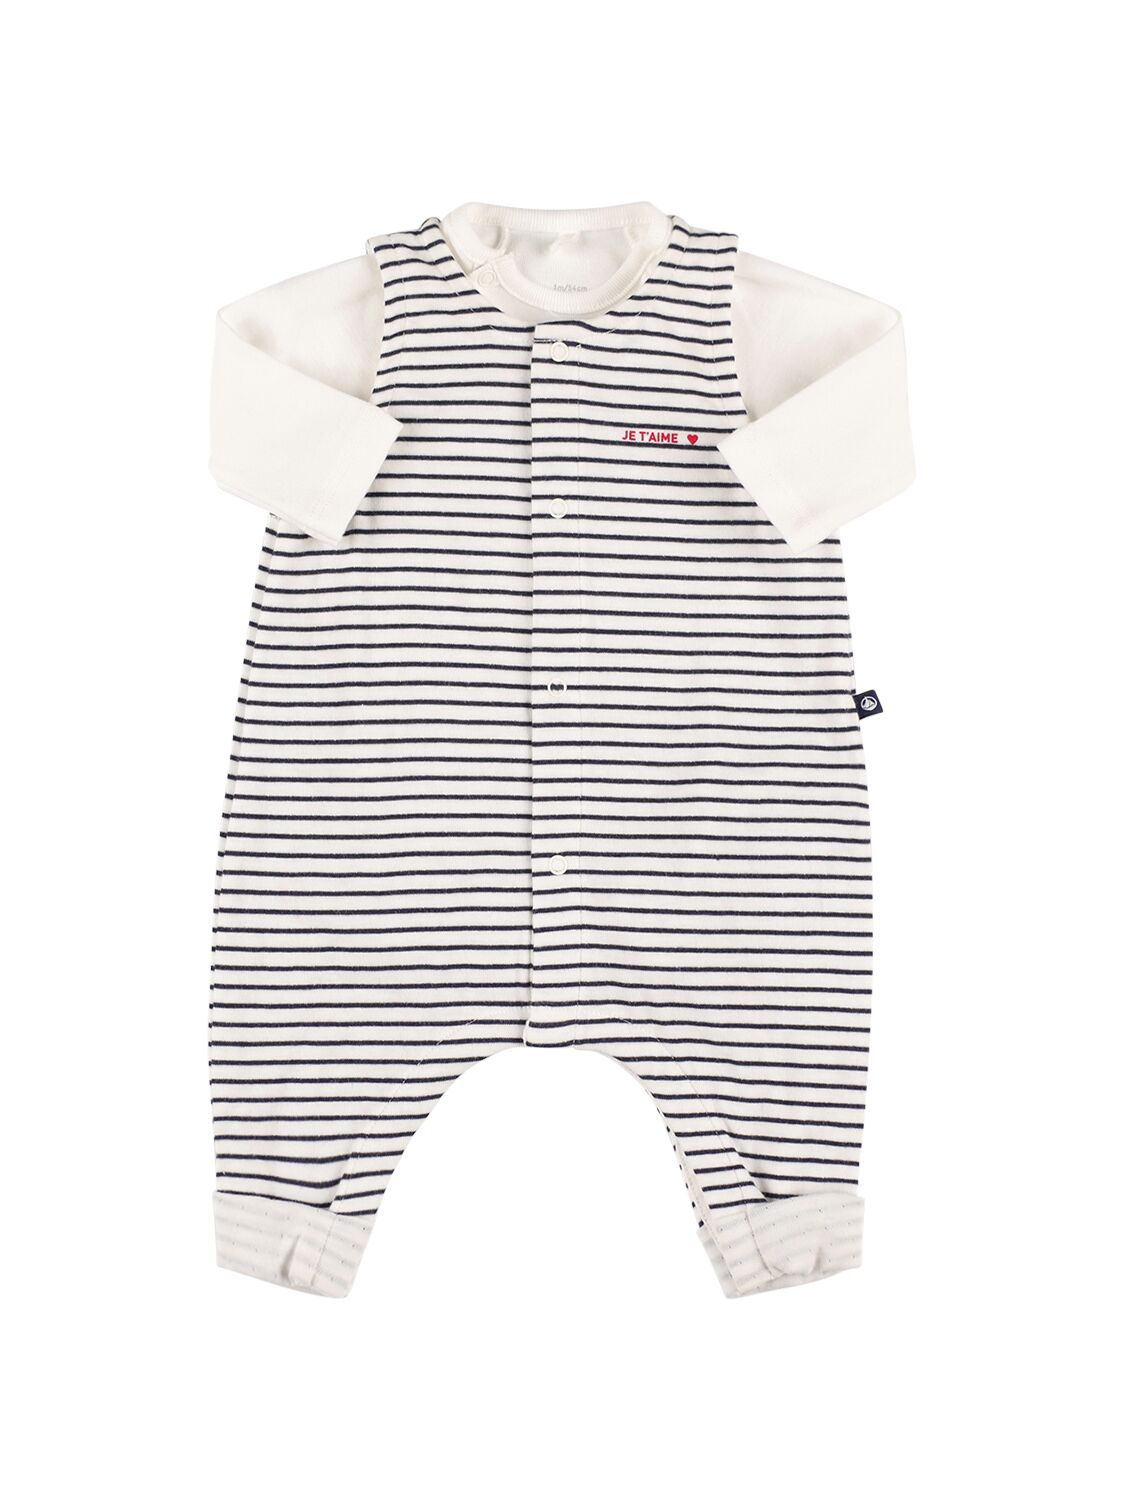 Petit Bateau Babies' Striped Cotton Dungarees & T-shirt In White,navy